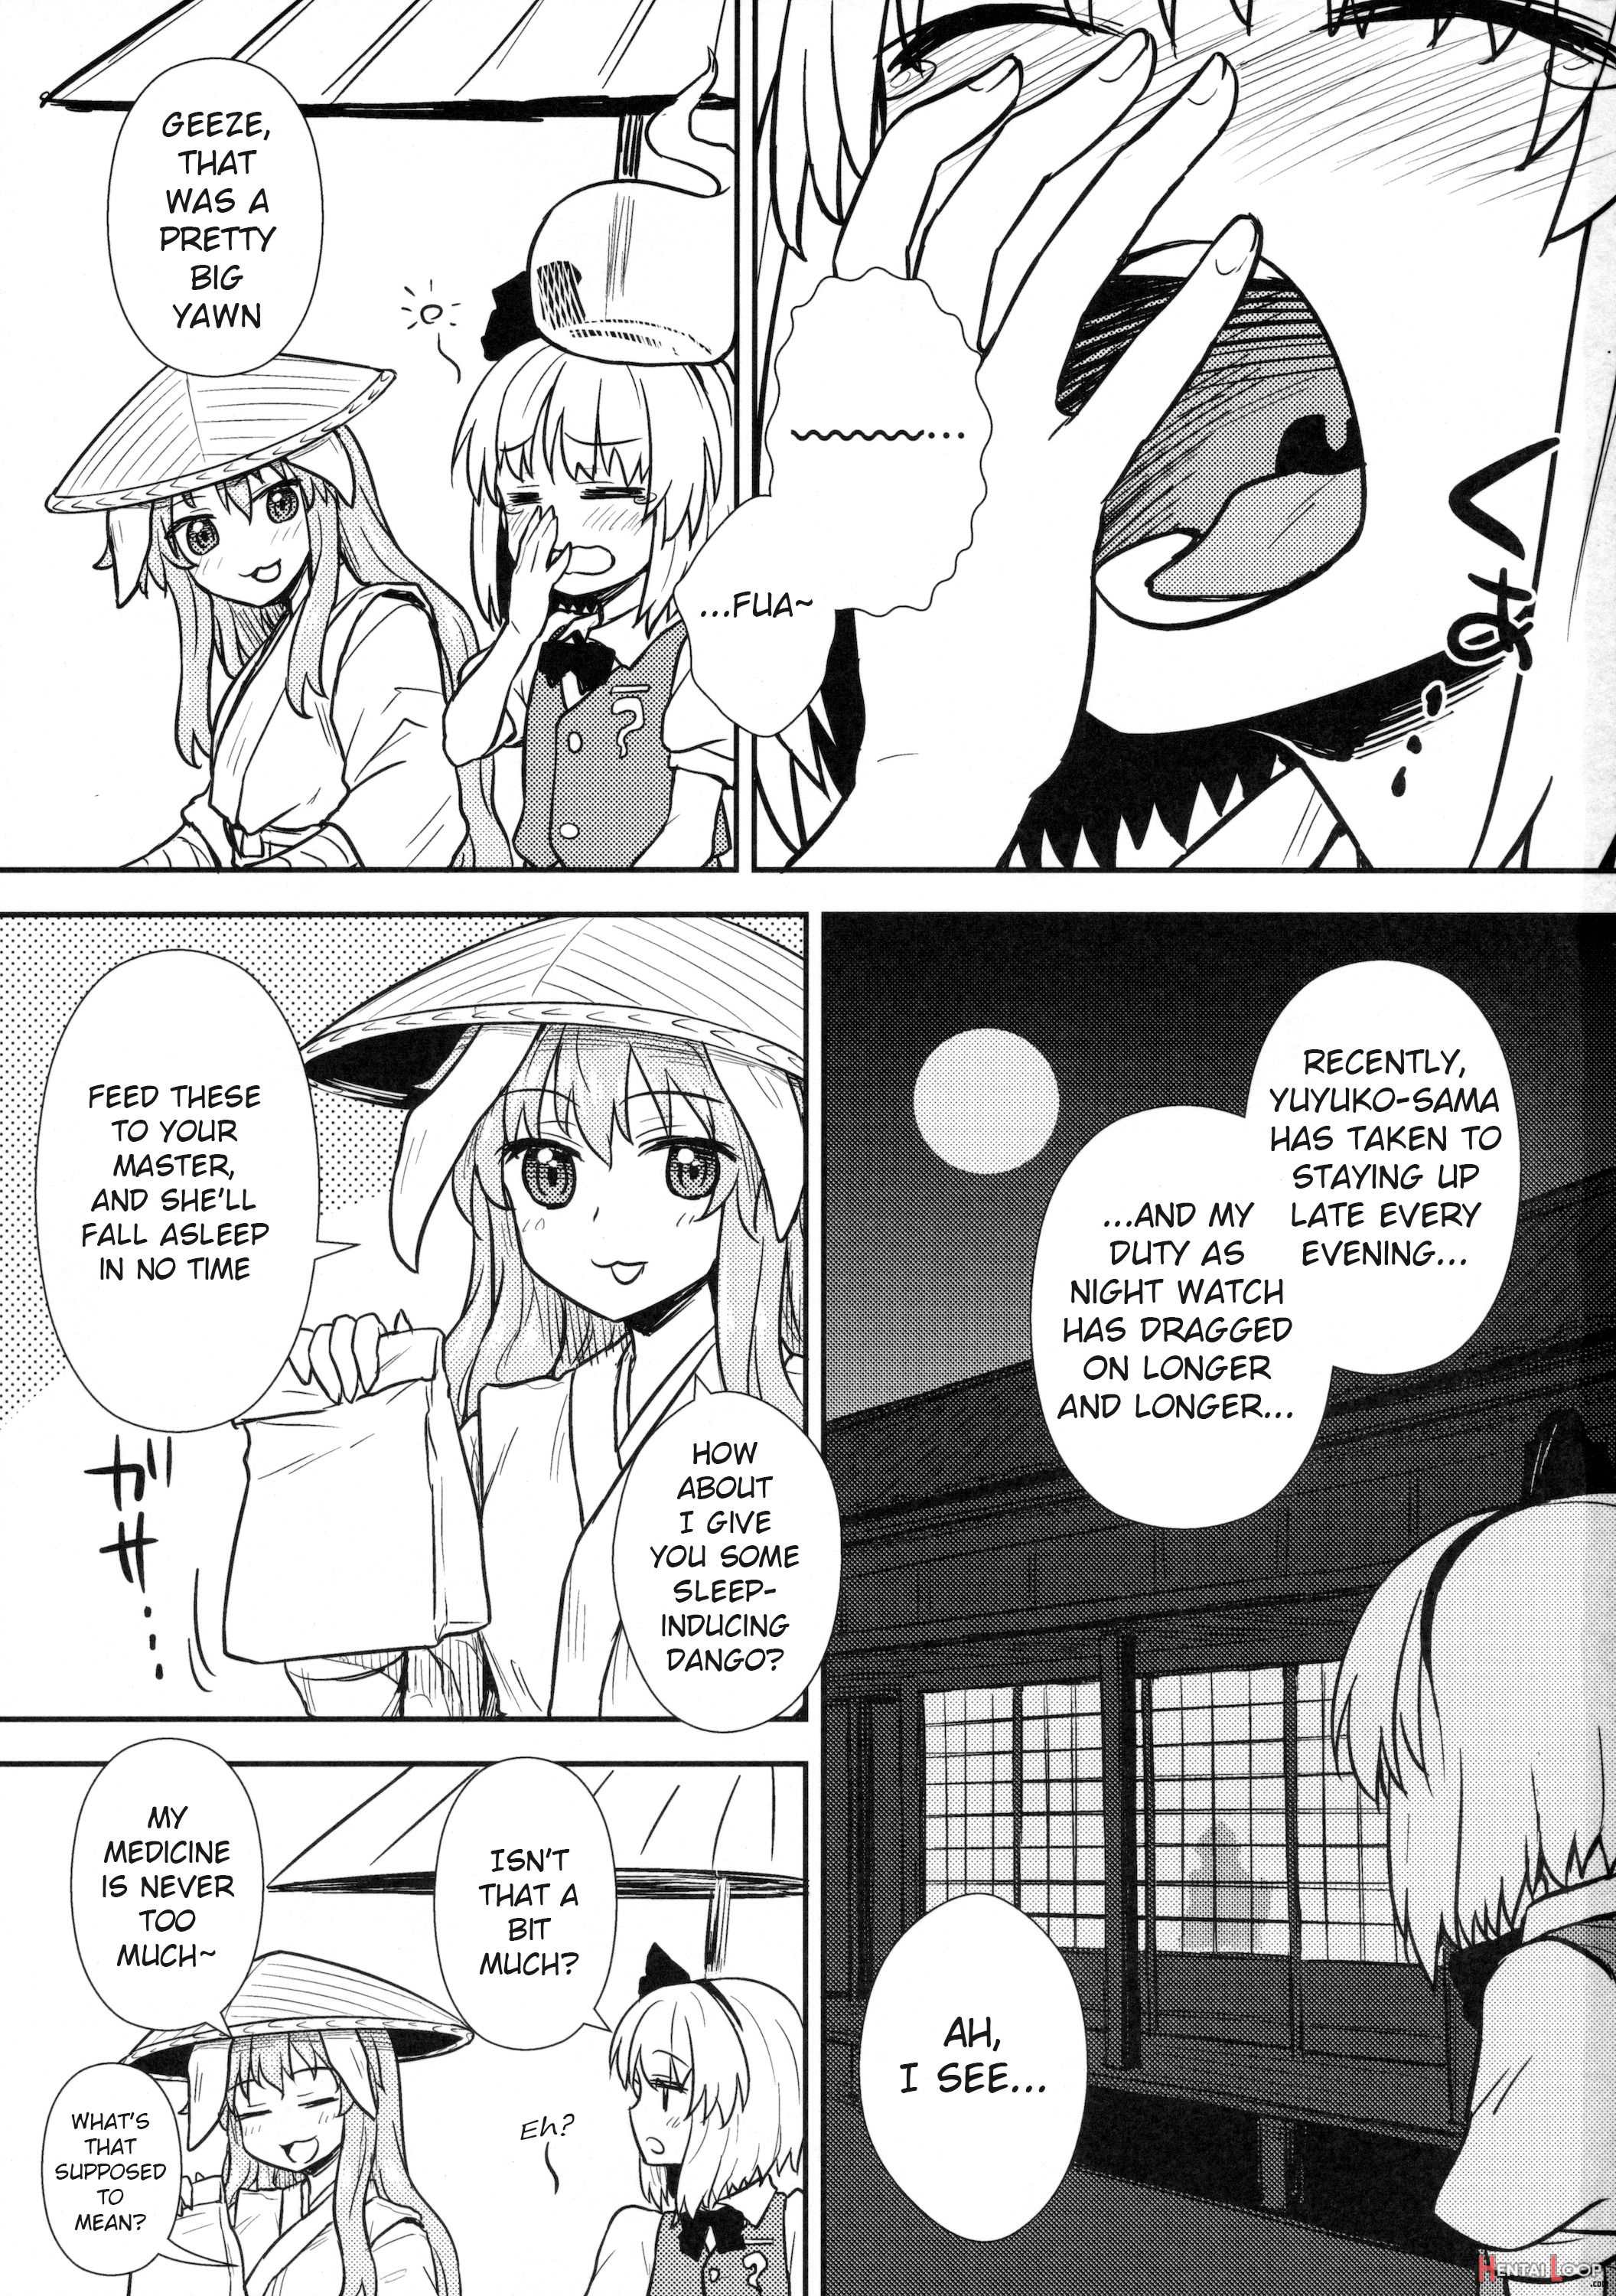 Youmu's Coming Of Age page 2